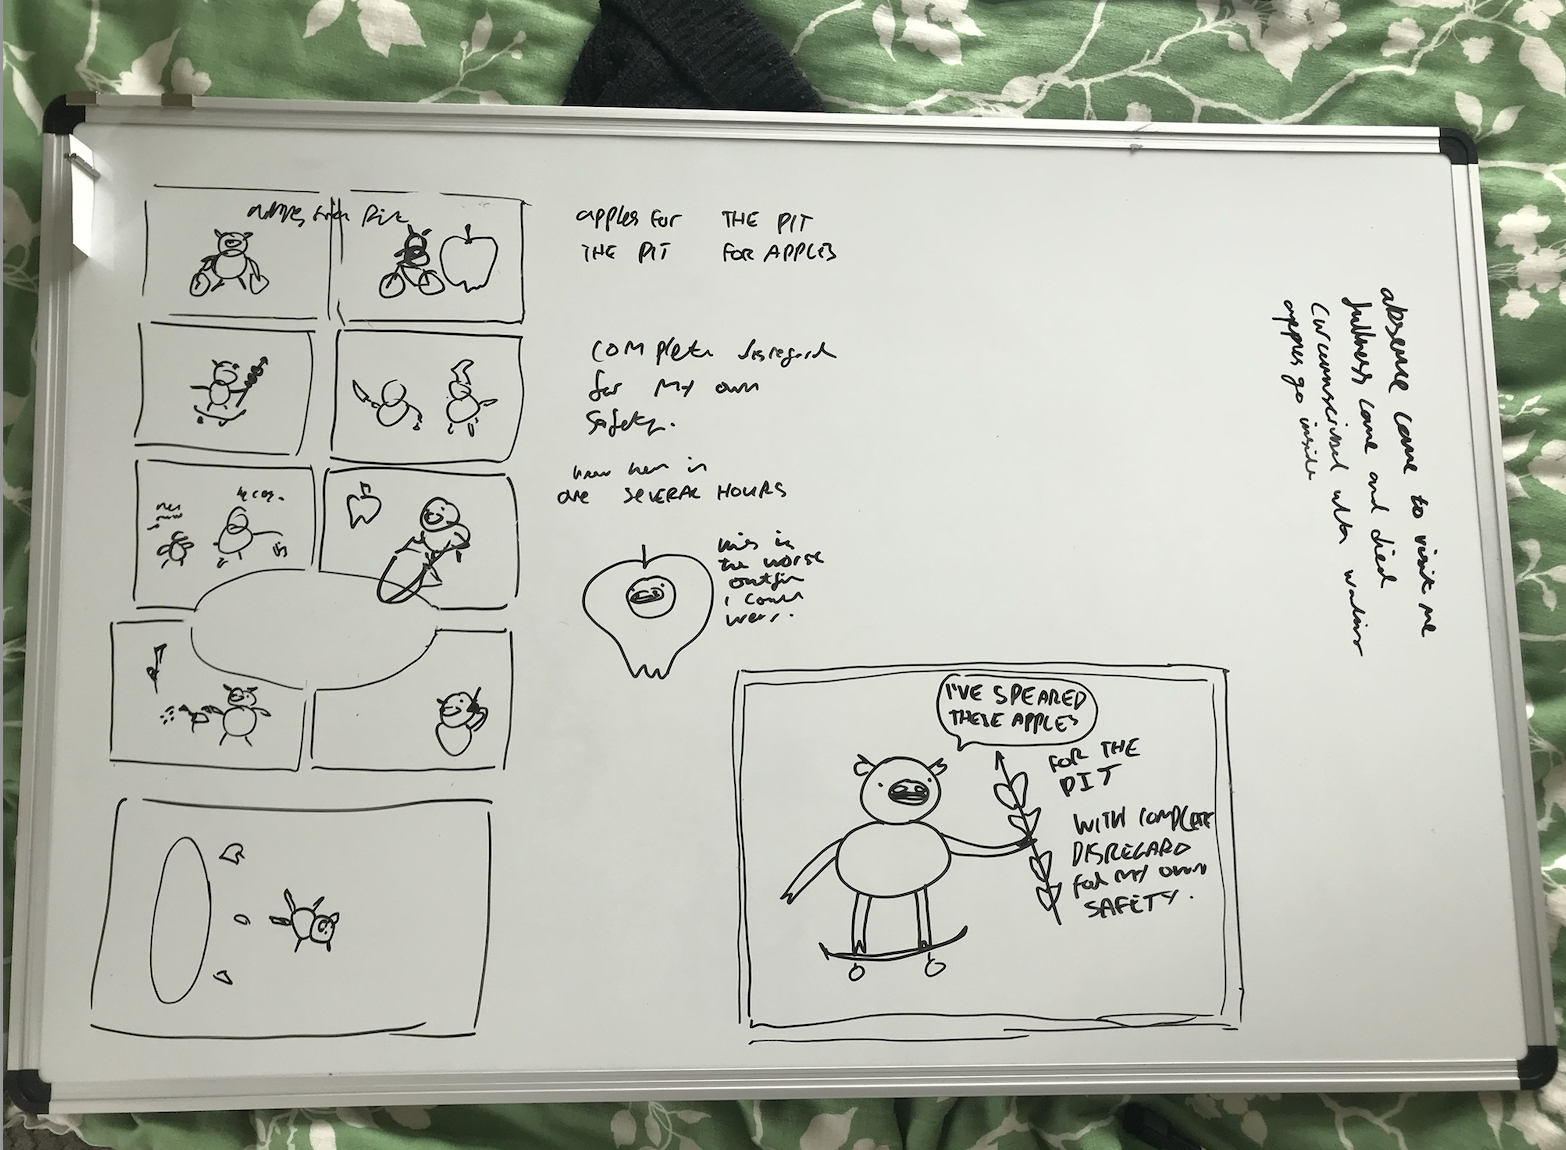 a white board with a rough zine layout drawn on it